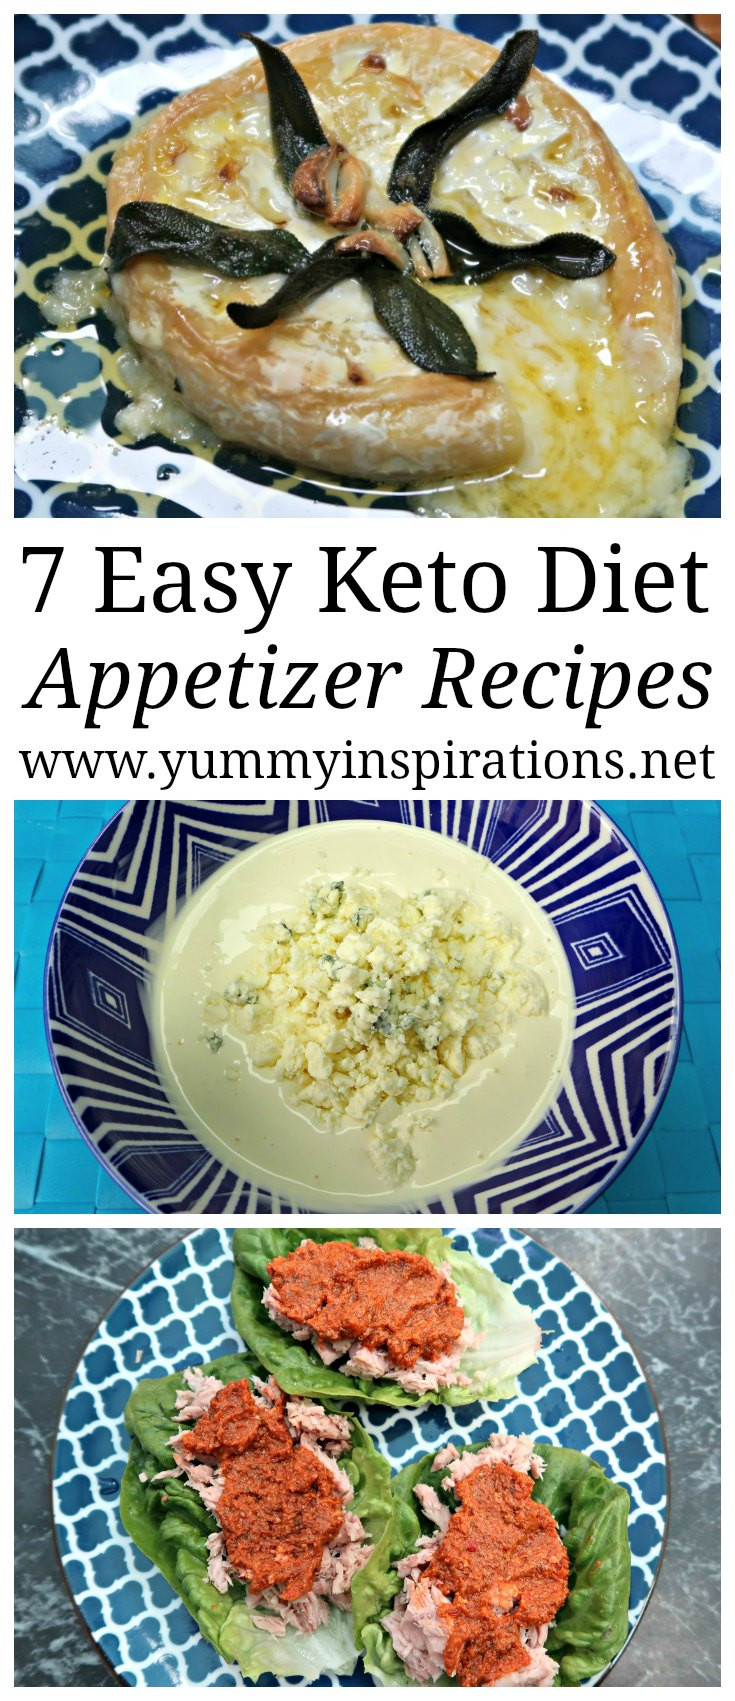 Keto Diet Easy
 7 Easy Keto Appetizers Recipes Simple Low Carb Appetizer